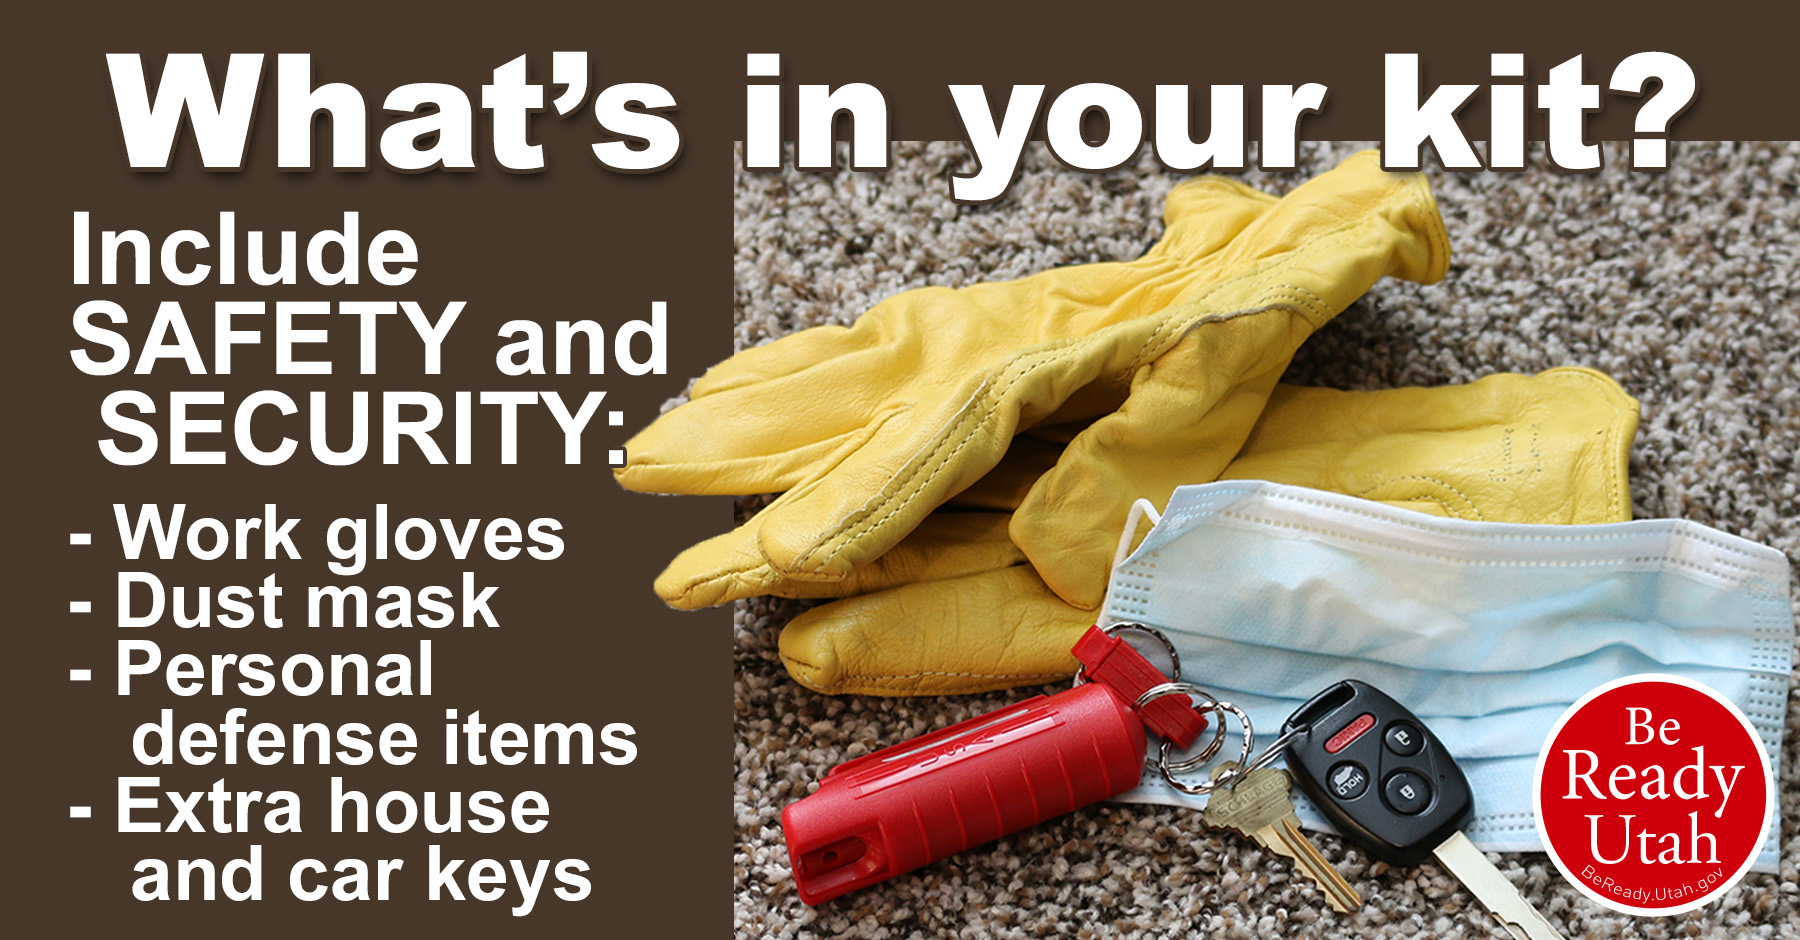 Disaster Supply Kits need to include Safety and Security items like work gloves, dust mask, defense items, house and car kets.